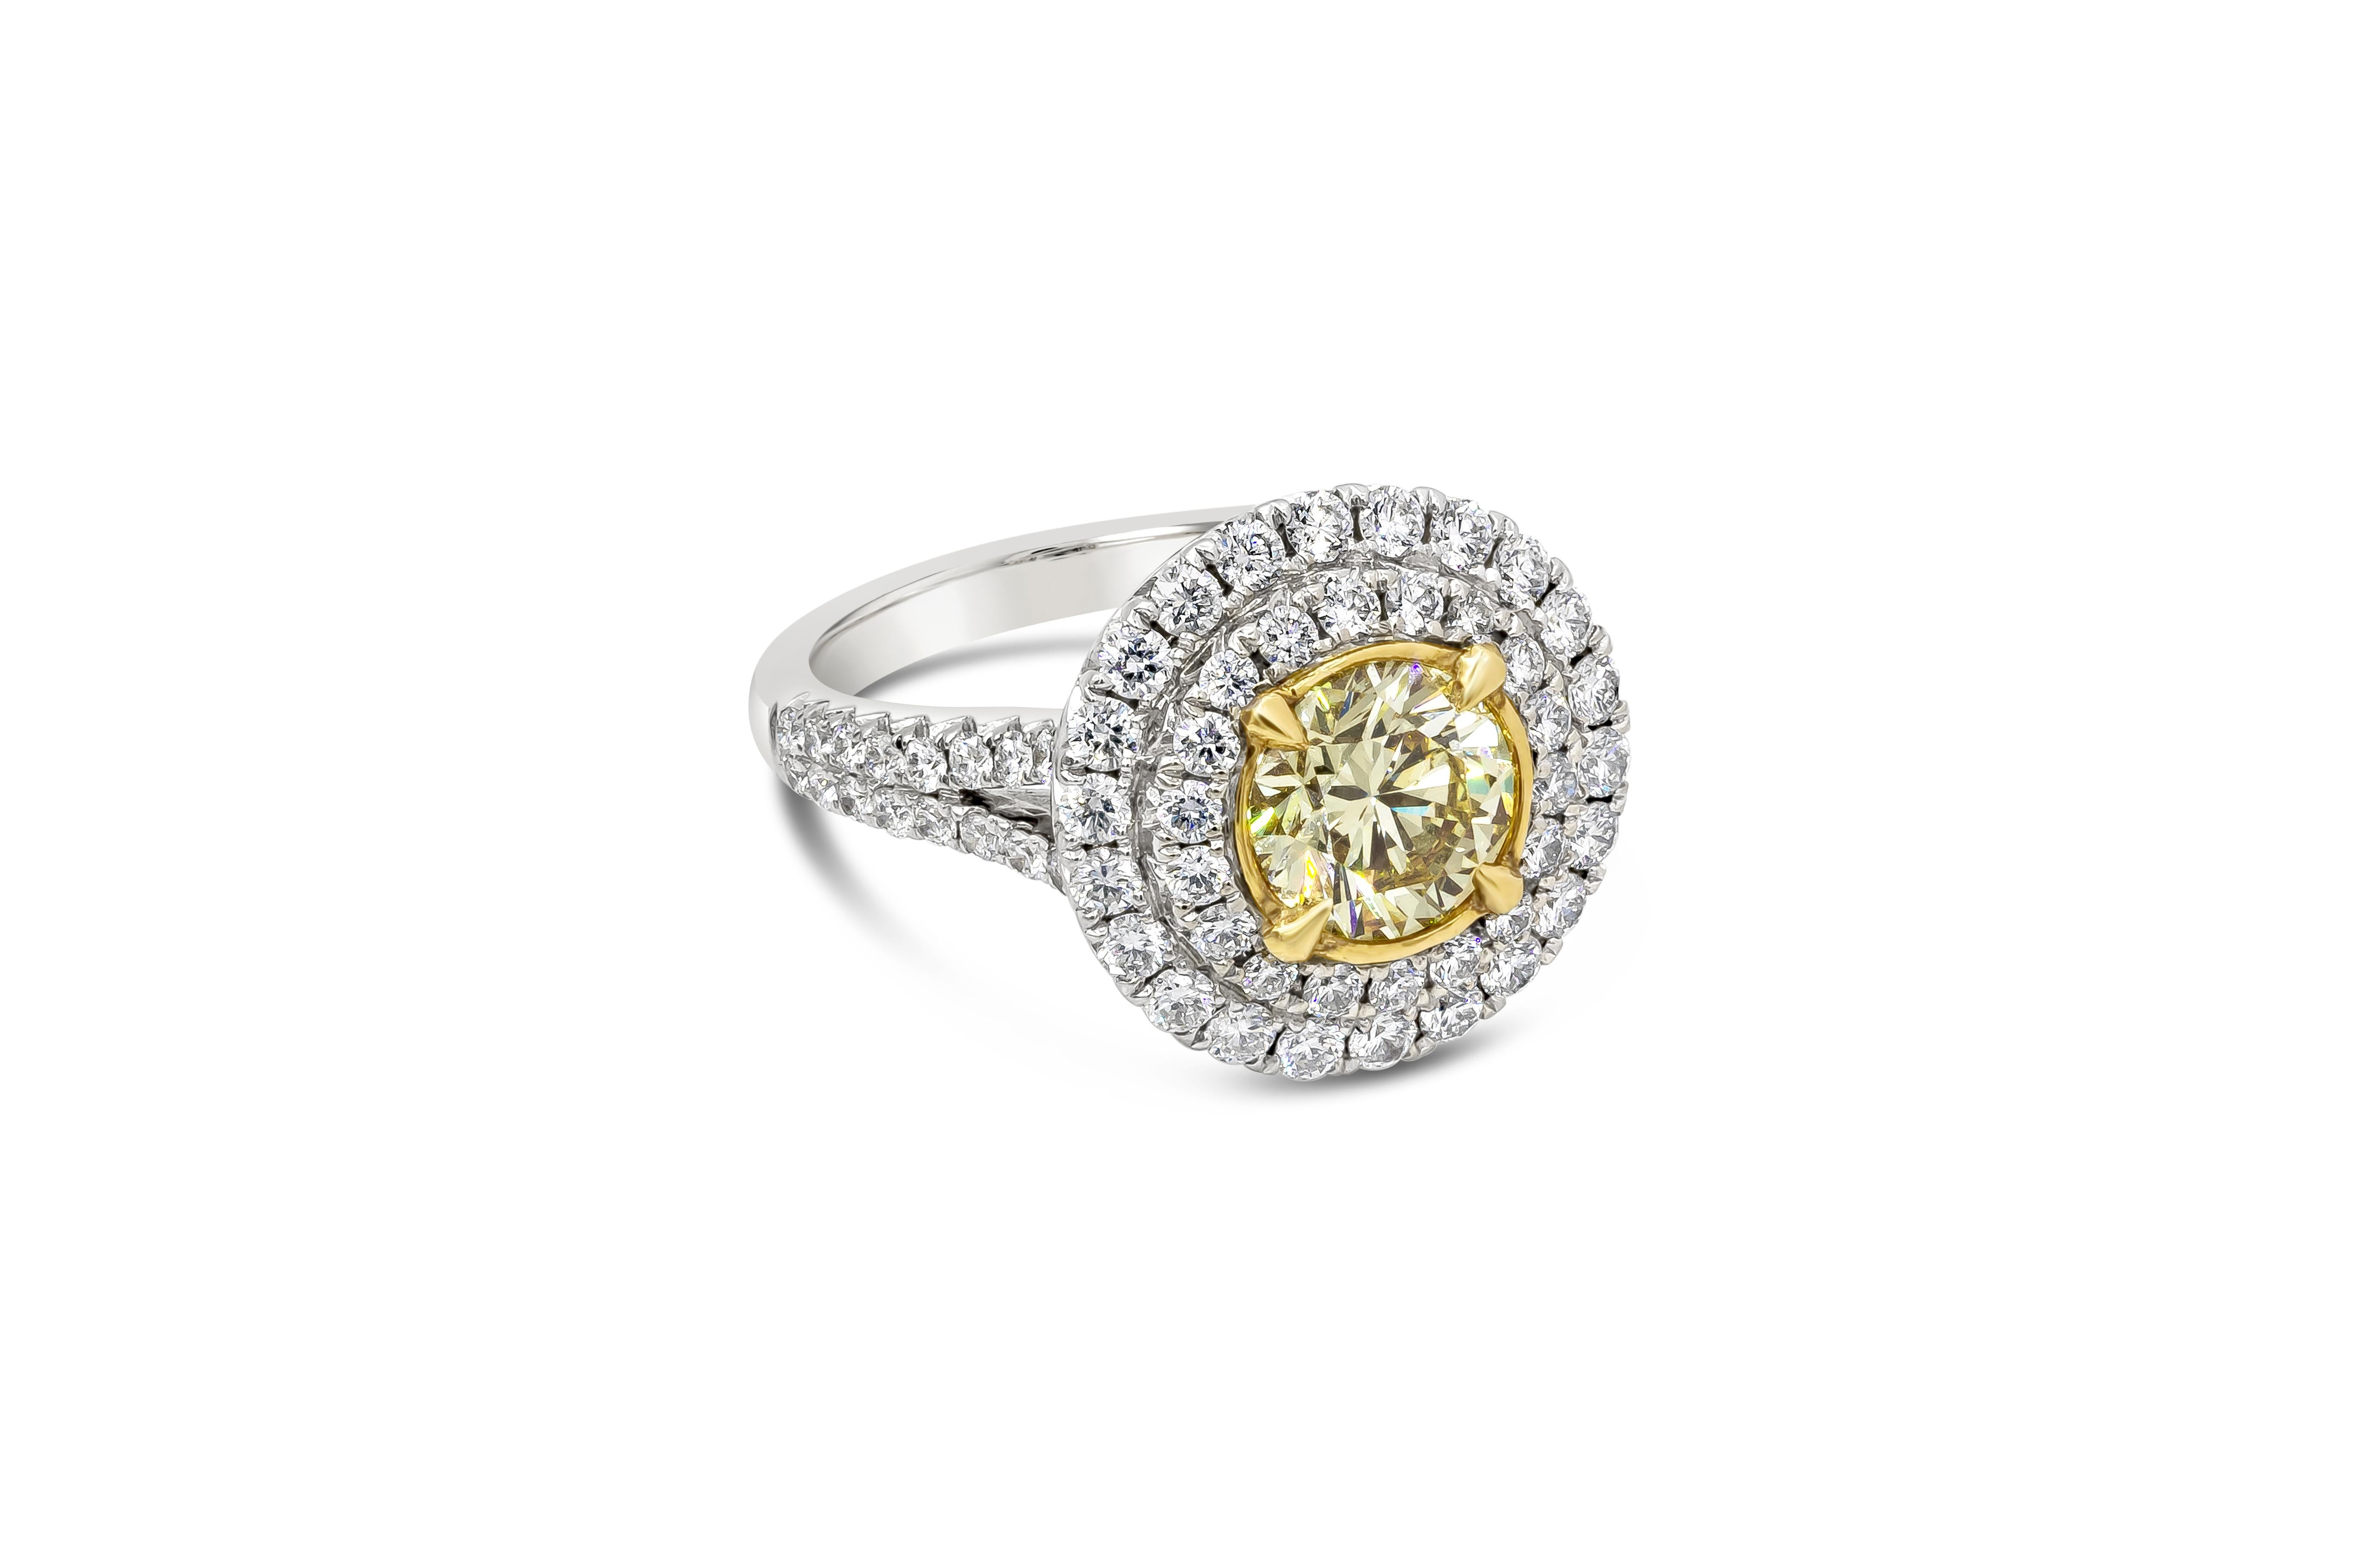 A spectacular engagement ring style showcasing a 1.41 carat round shape diamond certified by GIA as Fancy Light Yellow color, SI2 in clarity. Center diamond is surrounded by two rows of round brilliant diamonds in an 18k white gold split shank